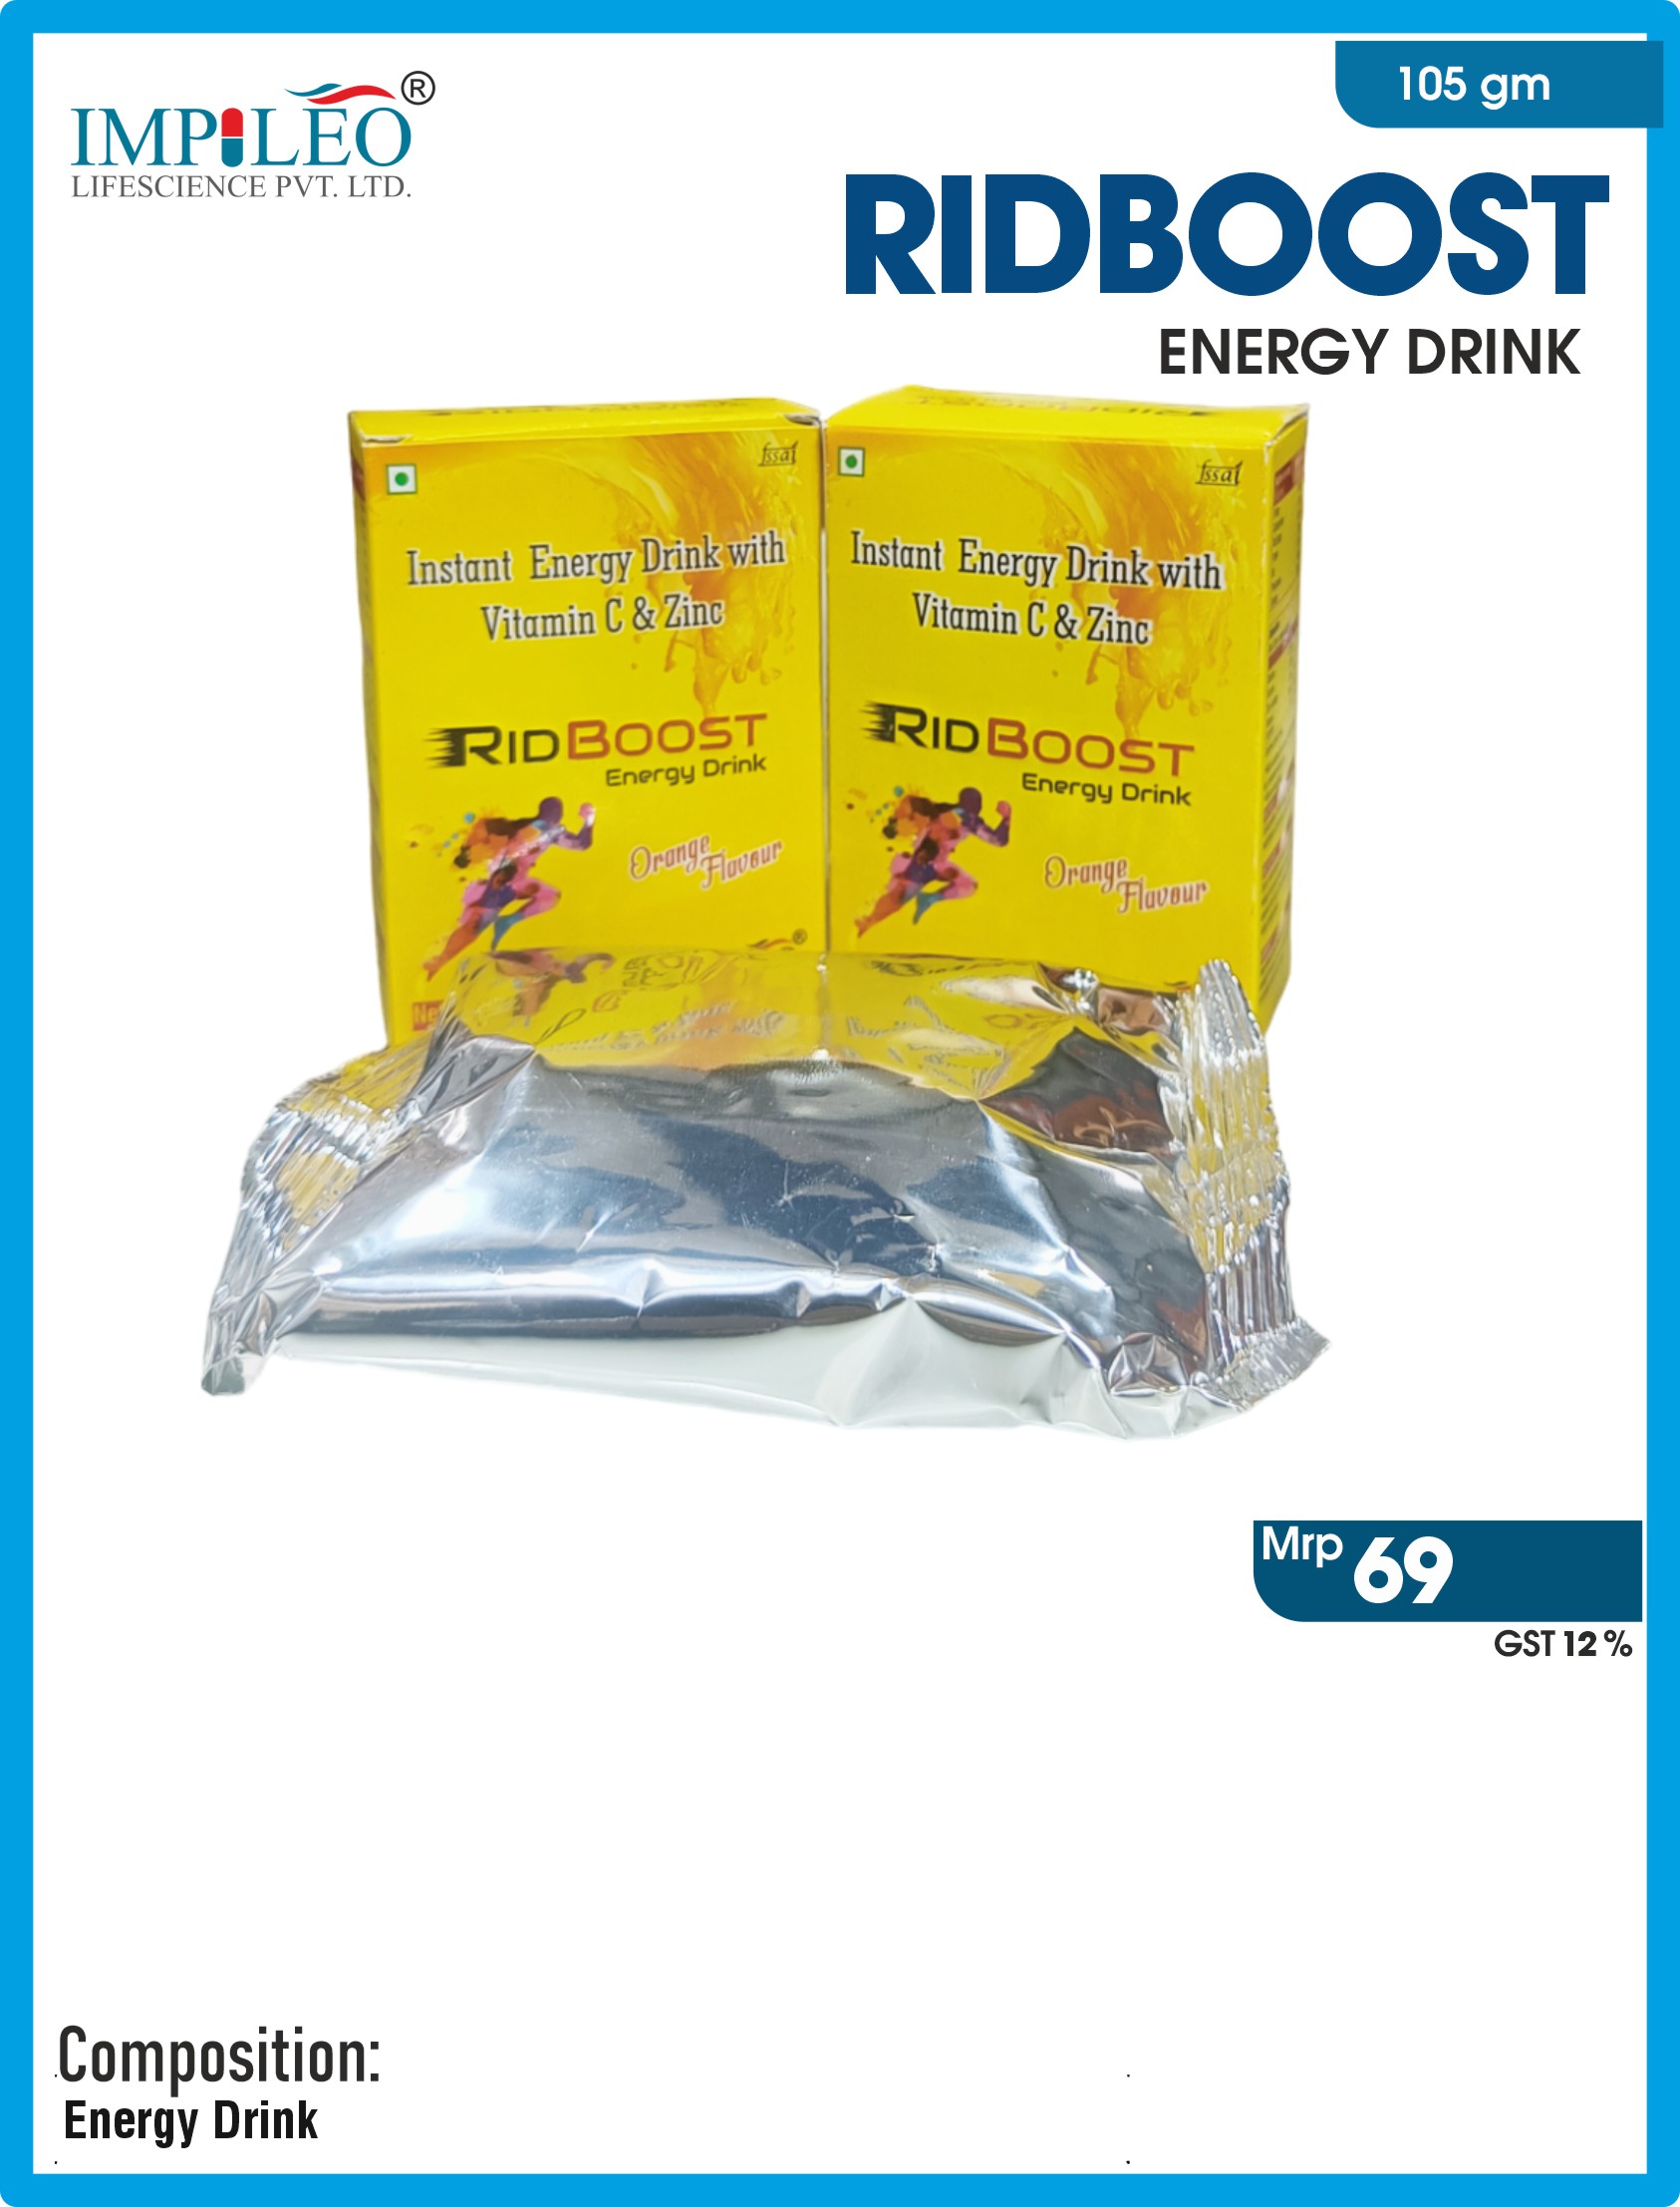 Unleash Vitality: Premium Ridboost (Energy Drink) from Top PCD Pharma Franchise in Chandigarh